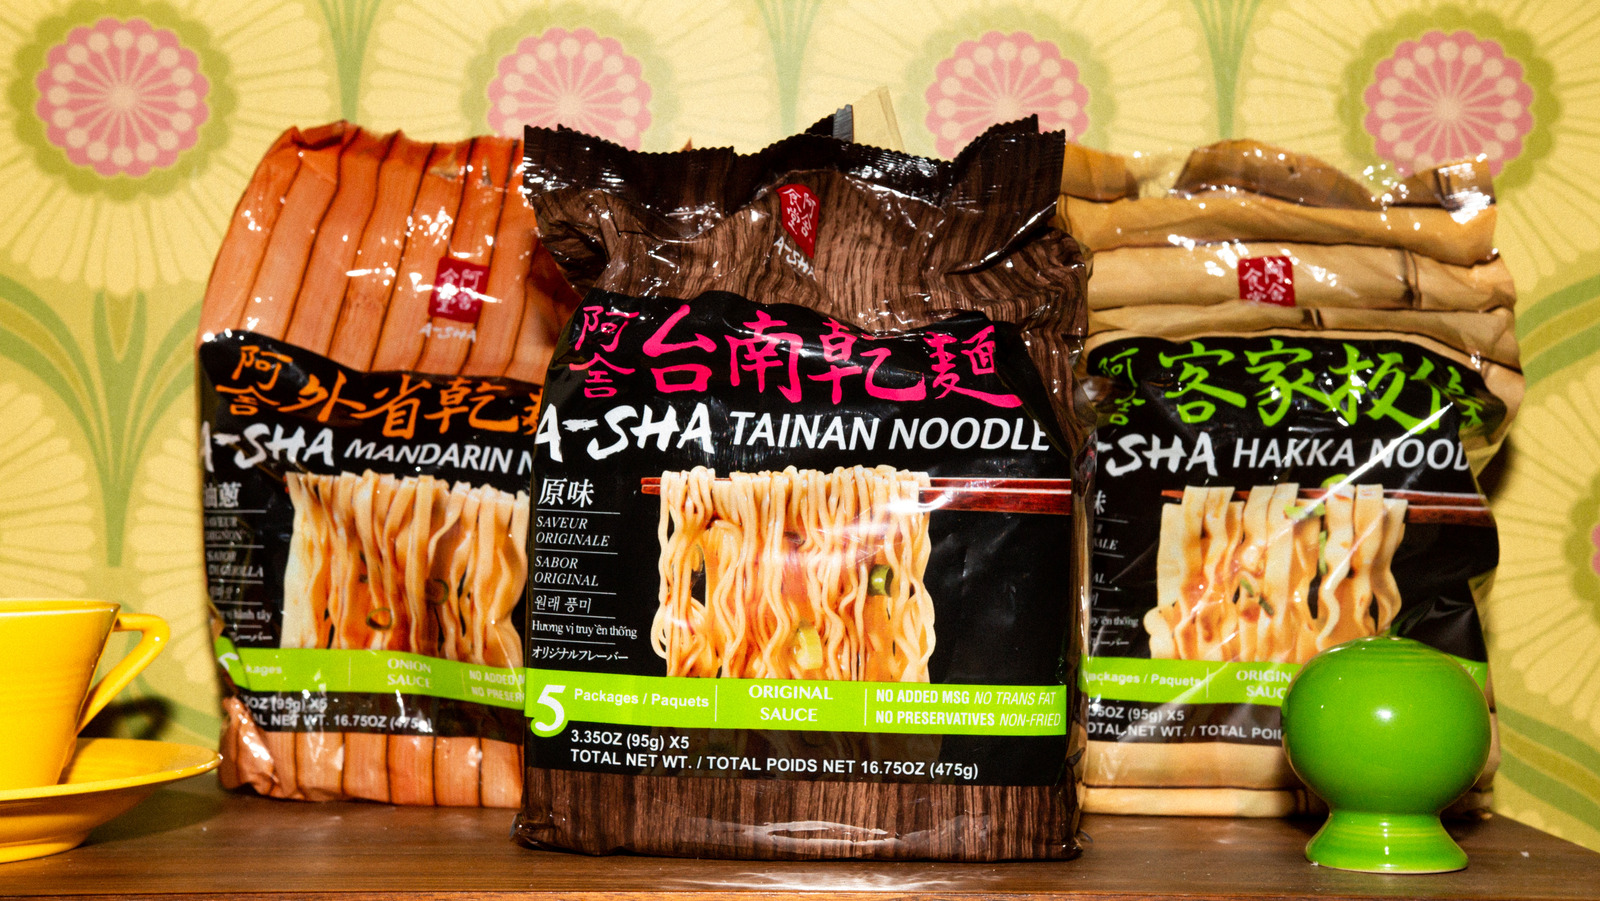 CUP NOODLES® ANNOUNCES NEW PAPER CUP PACKAGING FOR ITS ICONIC RAMEN NOODLES